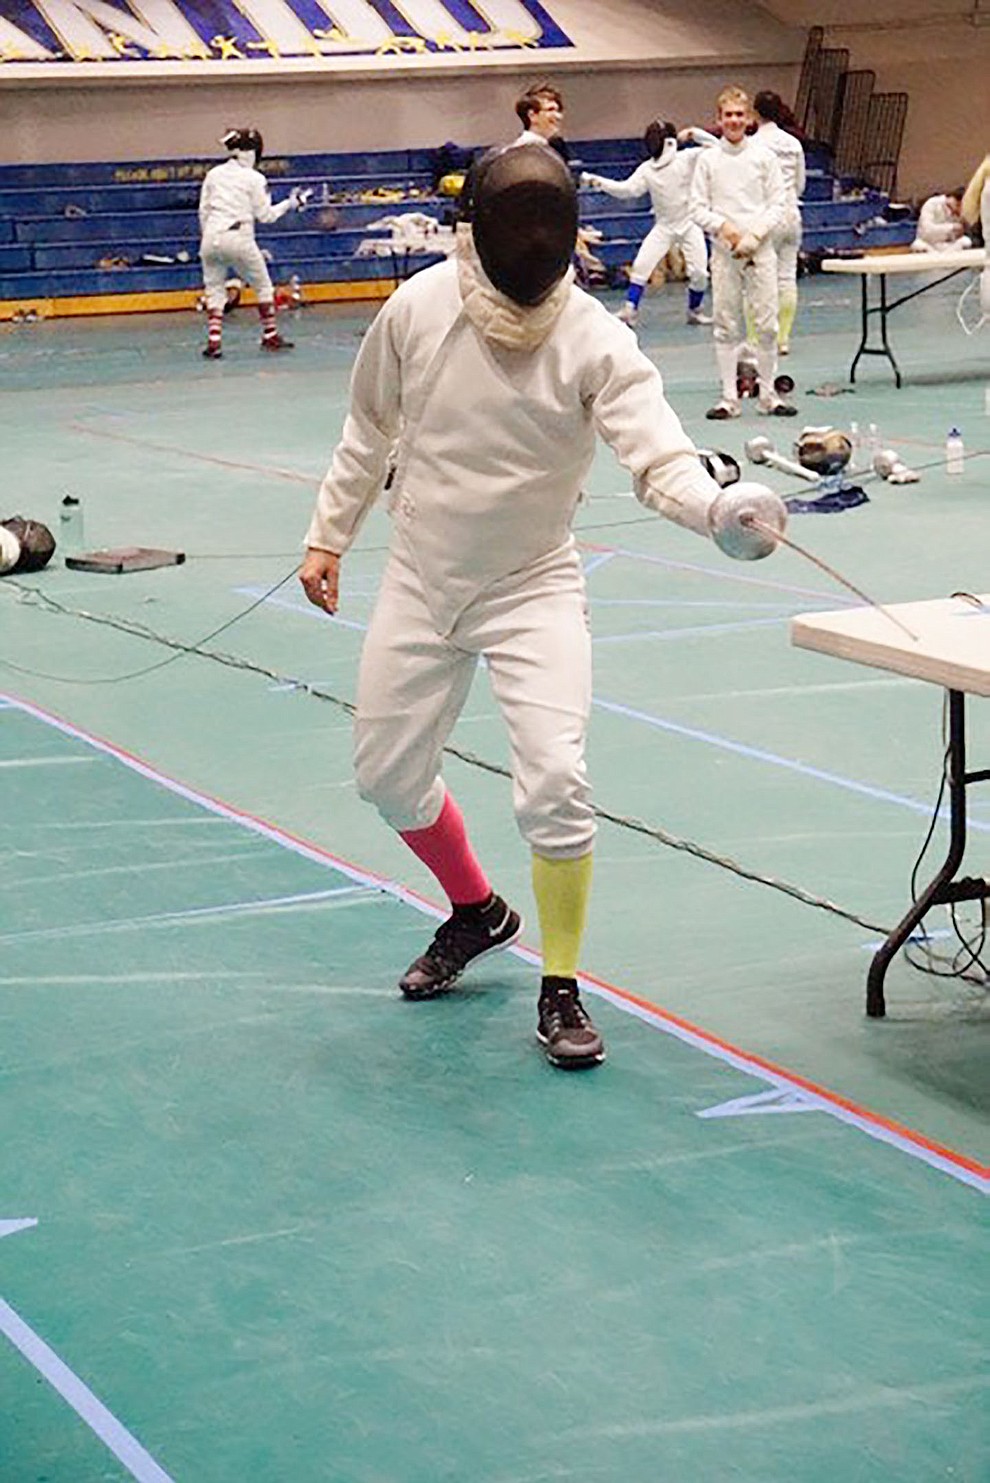 Braden Wiegand-Shahani of Salle d’Escrime of Prescott competes during the 25th Annual Prescott Fall Fencing Tournament at Prescott High School on Sunday, Sept. 1, 2019. (Aaron Valdez/Courier)